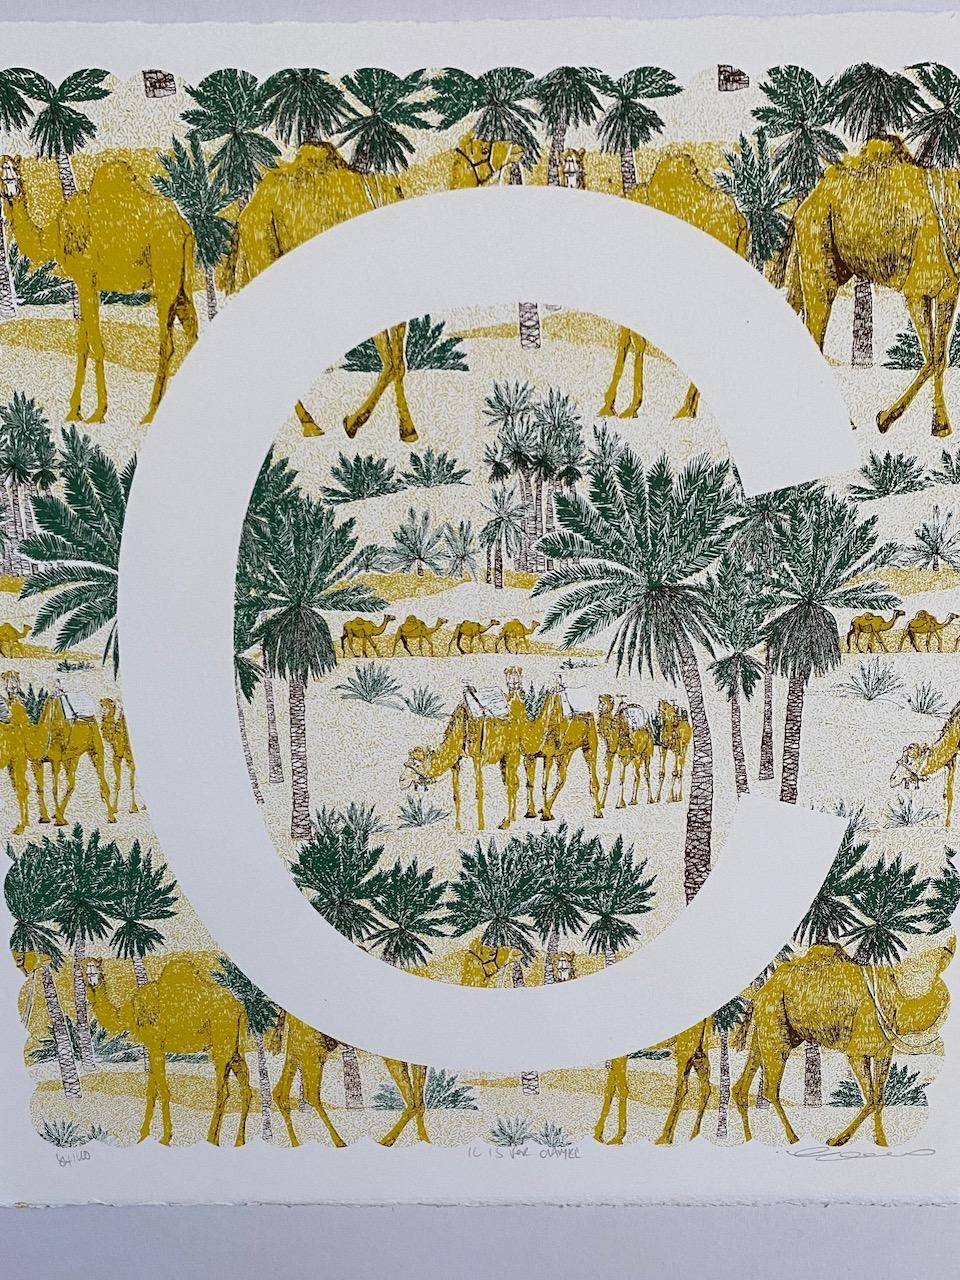 Clare Halifax
C is for Camel
Limited Edition 3 Colour Silkscreen Print
Edition of 100
Image Size: H 35cm x W 35cm
Sheet Size: H 37cm x W 38cm x D 0.1cm
Sold Unframed
(Please note that in situ images are purely an indication of how a piece may